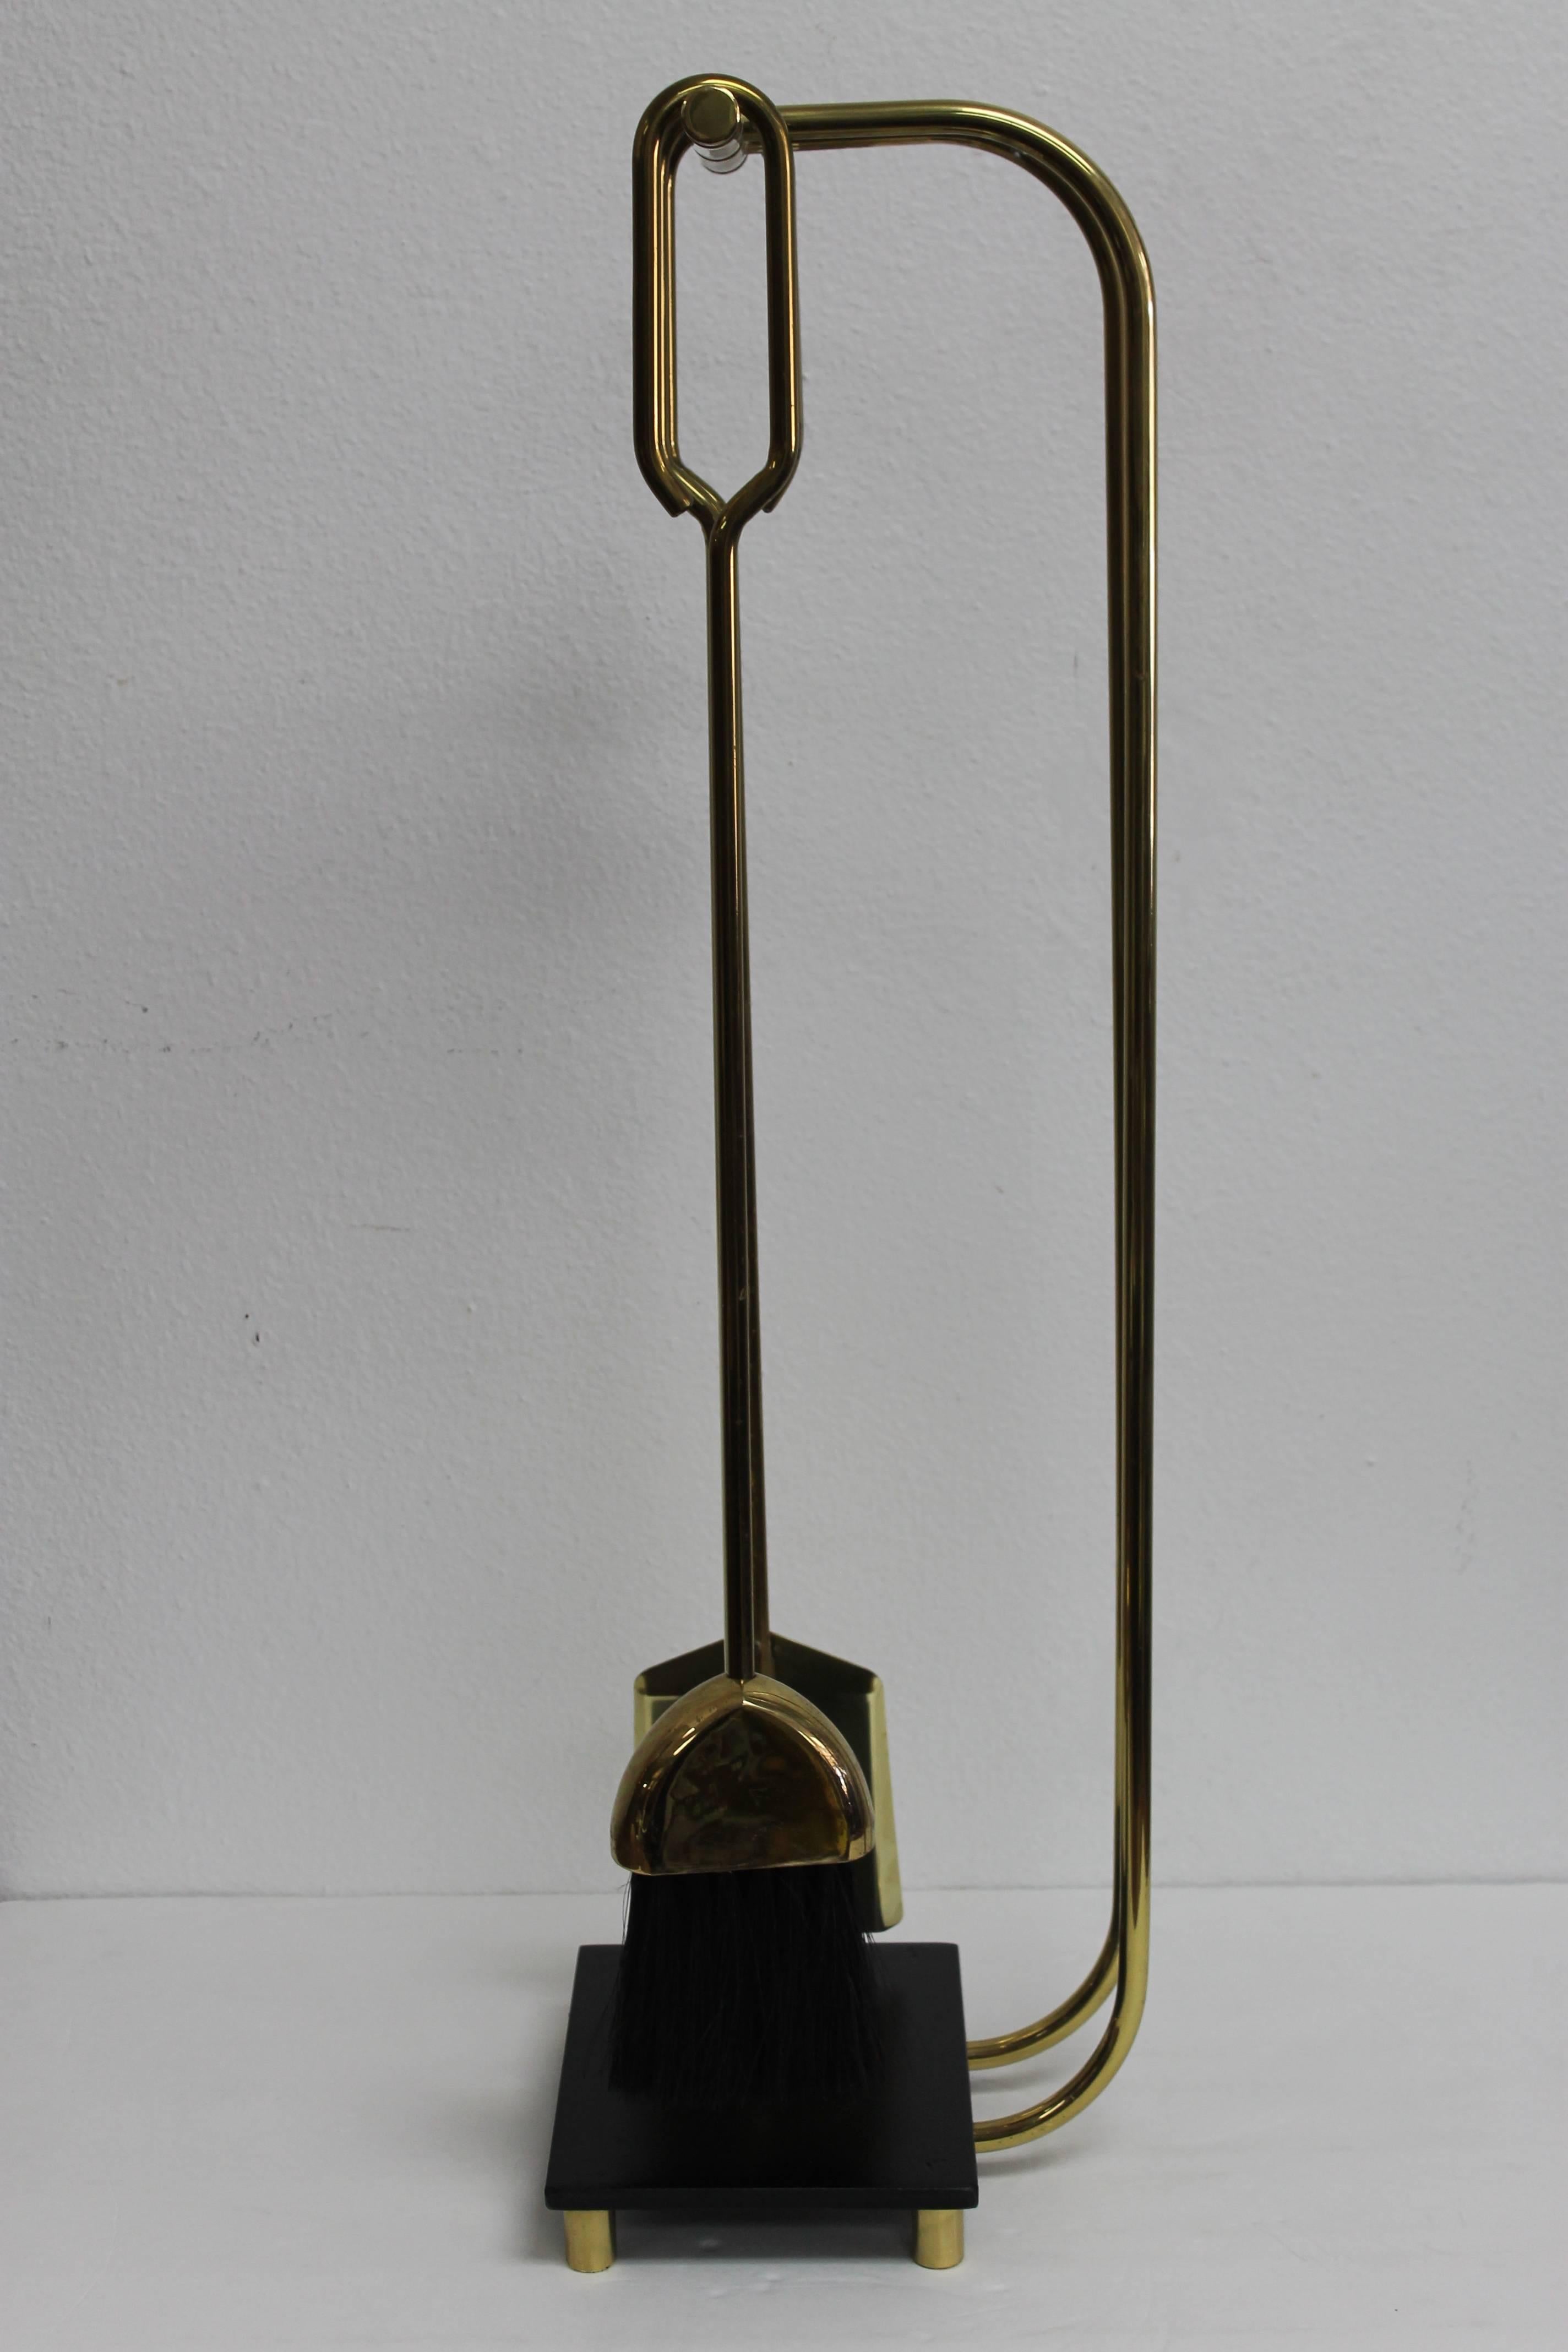 Elegant brass midcentury fire place fire tools. Base is 8” wide, 6” deep and 1.5” high. Tools are about 28” high. Total height when tools are in place is about 30". Tools have been polished and base has been repainted to its original black